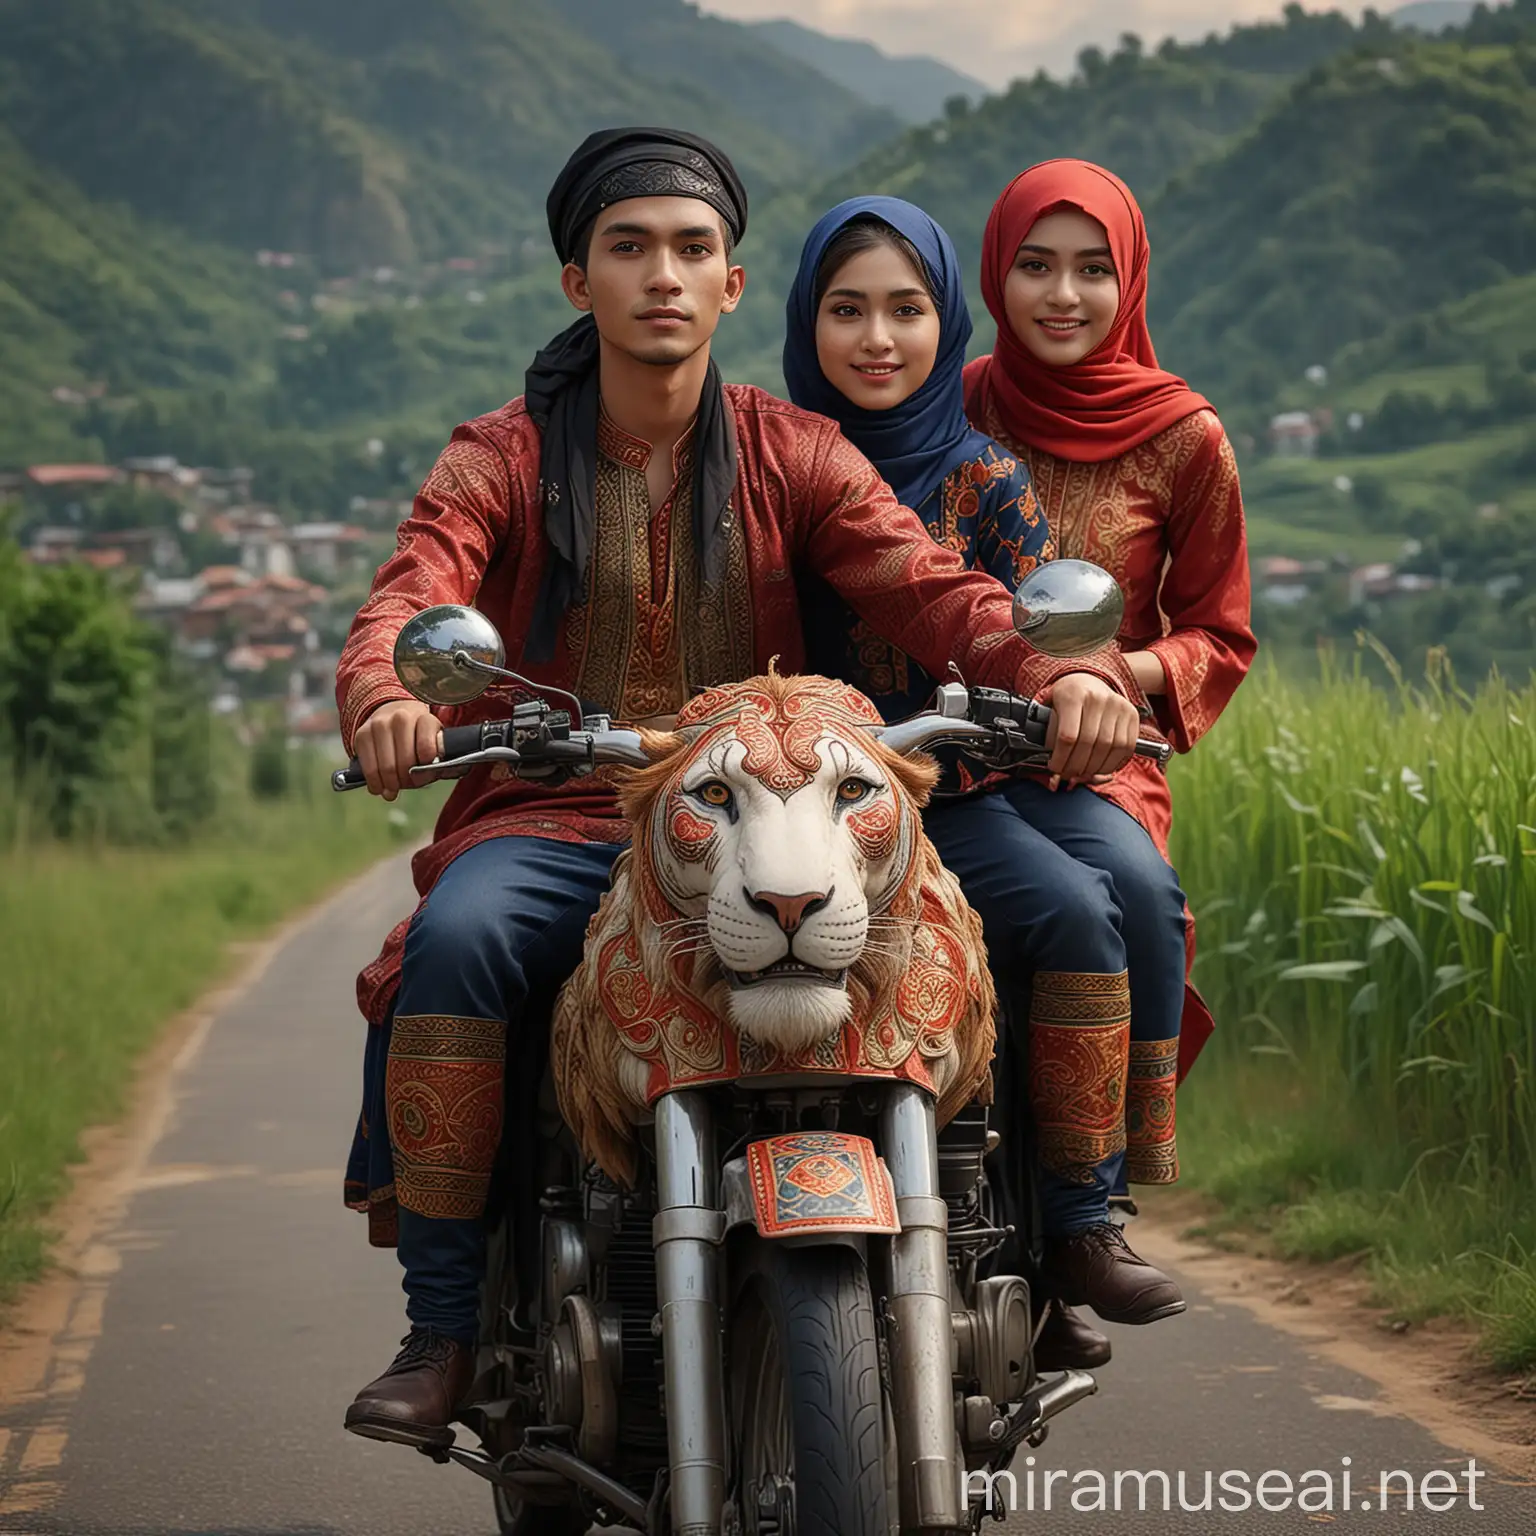 hyper realistic A 25-year-old young man wearing a black cap, riding two beautiful women wearing red and dark blue hijabs and elegant long-sleeved full-color kebaya tops, they rode a large and unique motorbike with decorative designs resembling lions, kings of the jungle or mythical creatures with beautiful full-color colors. This motorbike has two horns on the front and intricate patterns on the body. The three of them smiled as they drove along the road that crossed the green fields of the city's outskirts and the mountains in the distance in partly cloudy weather with a hint of sunset light from the west. High quality photo-realistic HD. Lens diameter: 84 mm Image format: RAW, Lighting: Soft lighting and Studio light, White balance: Auto (WB auto), Focus: Super focus, Exposure: Auto (ISO auto), Aperture: Original Photo (for maximum detail), Zoom out (for good zoom optics) Depth of Field: Masterpiece (to create depth of field and focus details).